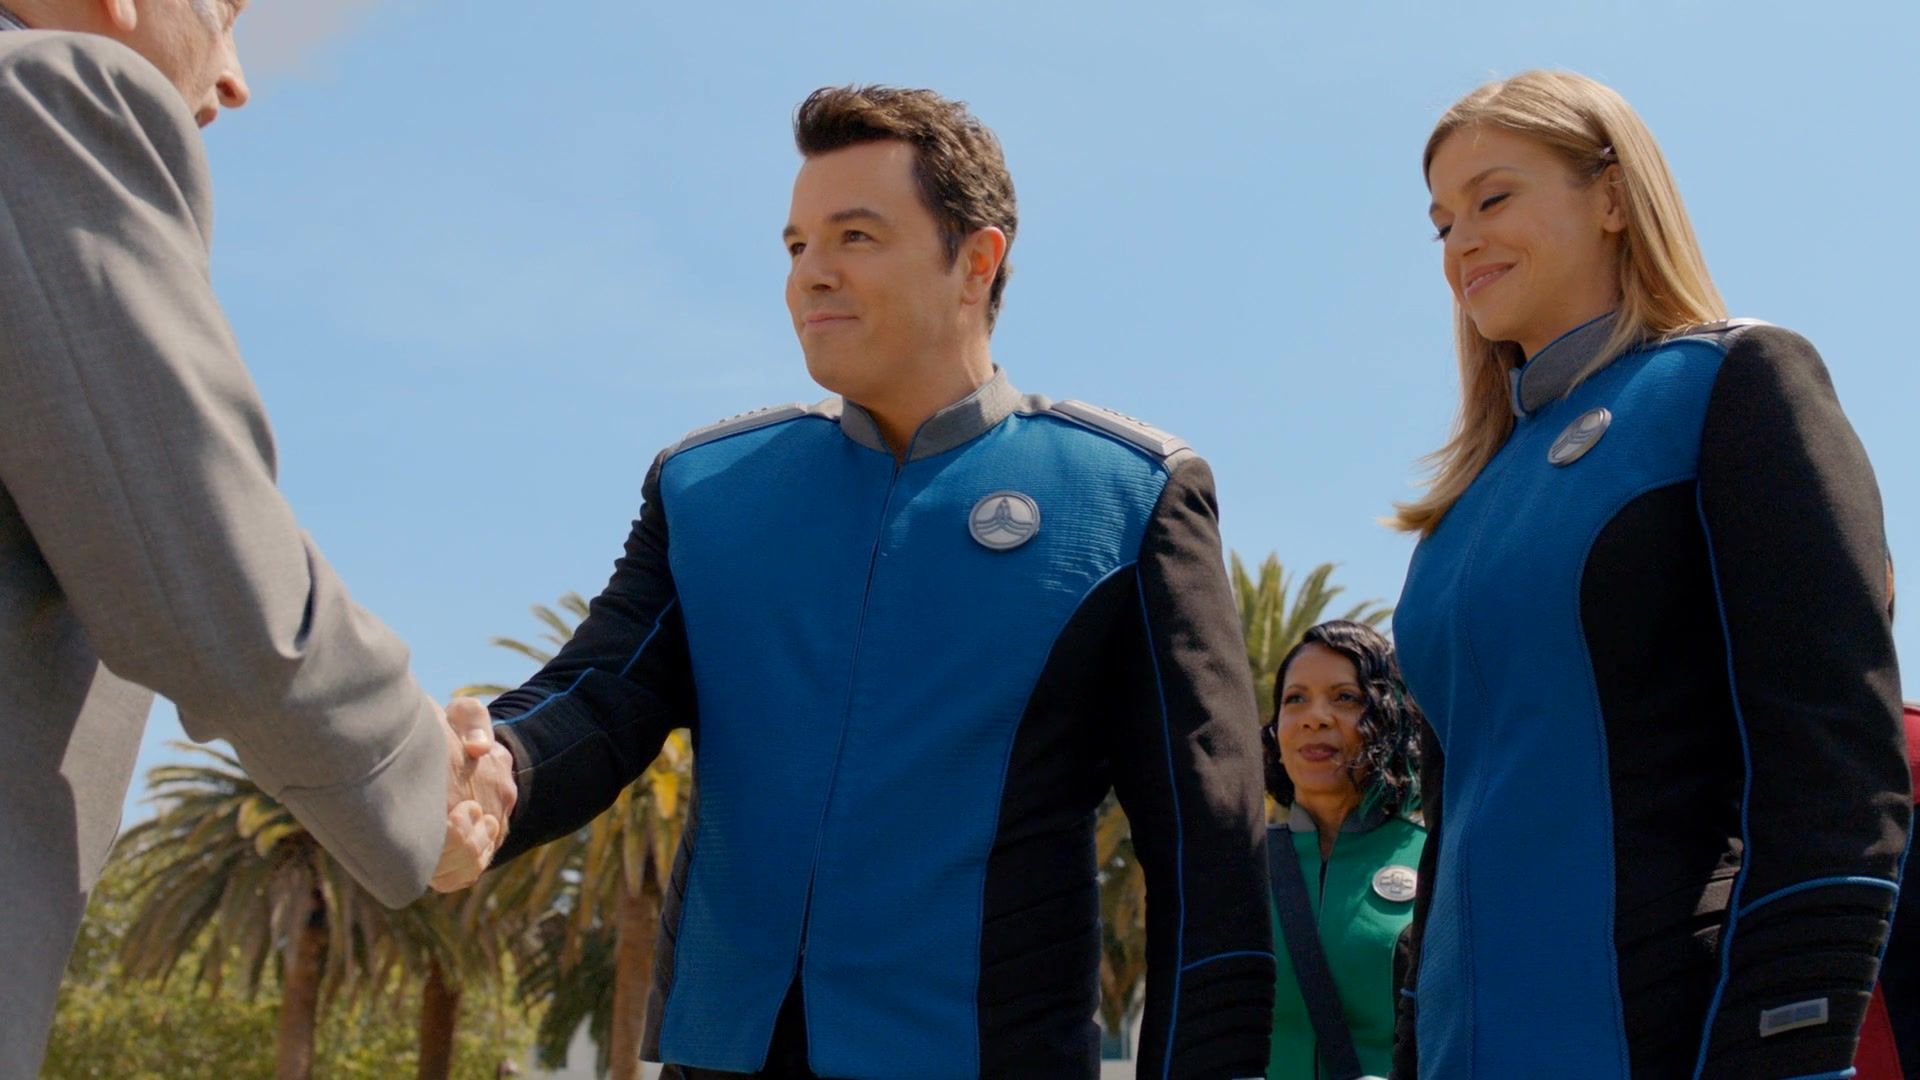 The_Orville_S02E05_All_the_World_is_Birthday_Cake_1080p_AMZN_WEB-DL_DDP5_1_H_264-NTb_0454.jpg